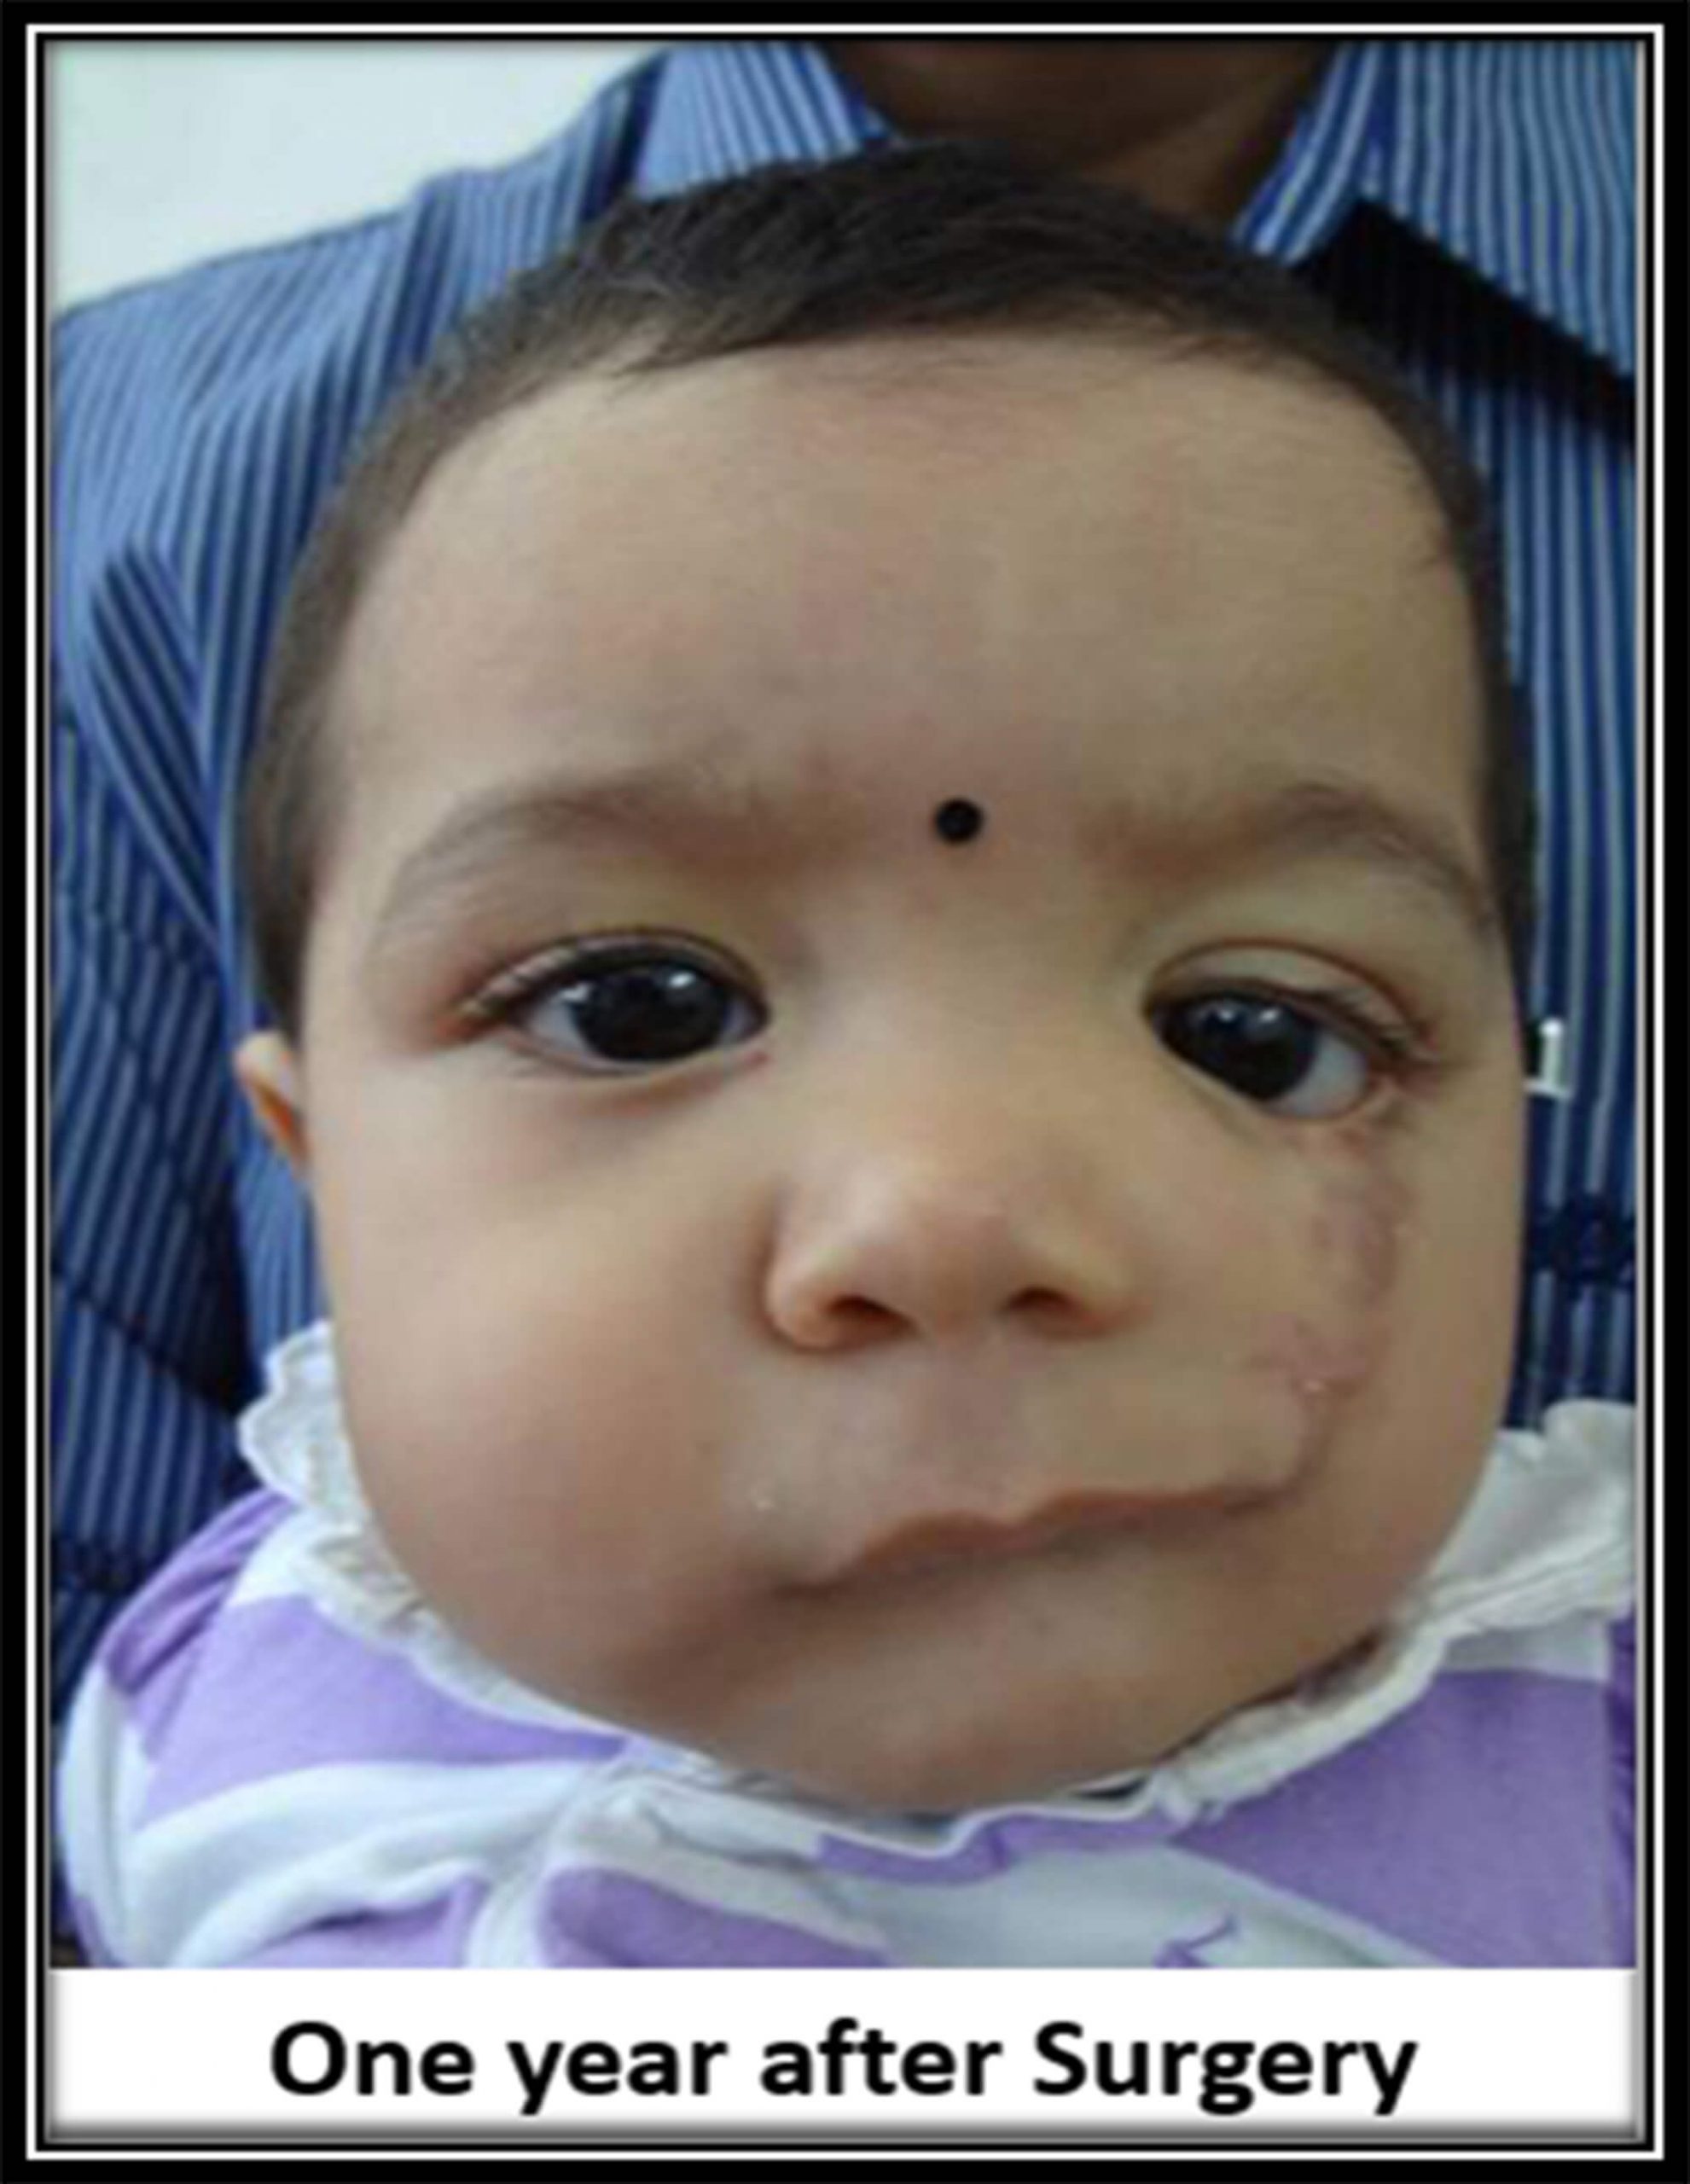 Cleft lip surgery after one year